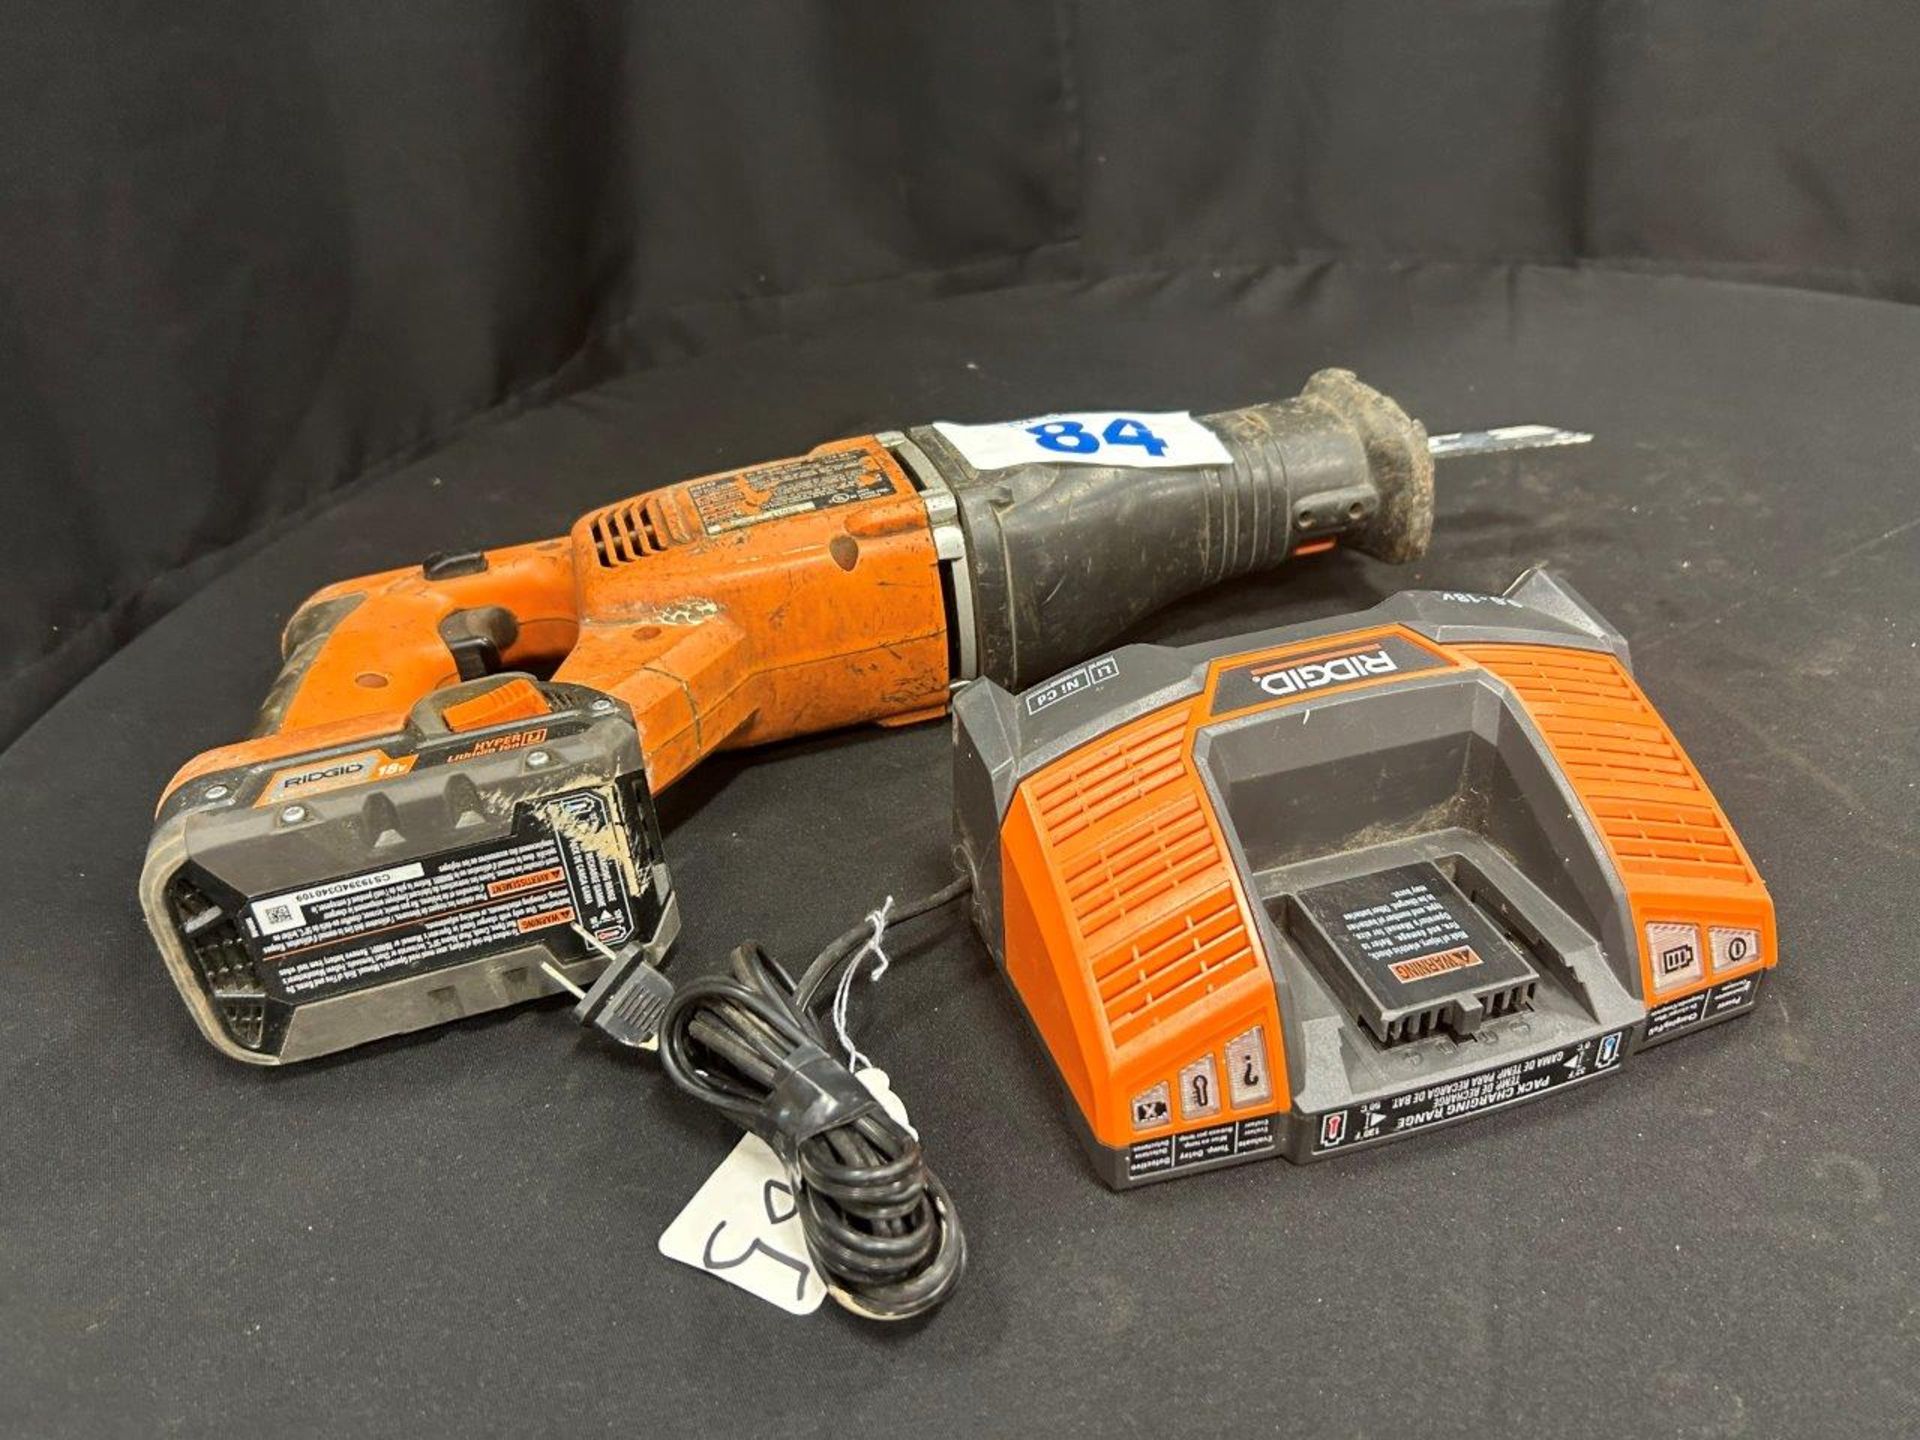 RIDGID 18V CORDLESS RECIPROCATING SAW W/ BATTERY AND CHARGER - B65 - Image 2 of 3